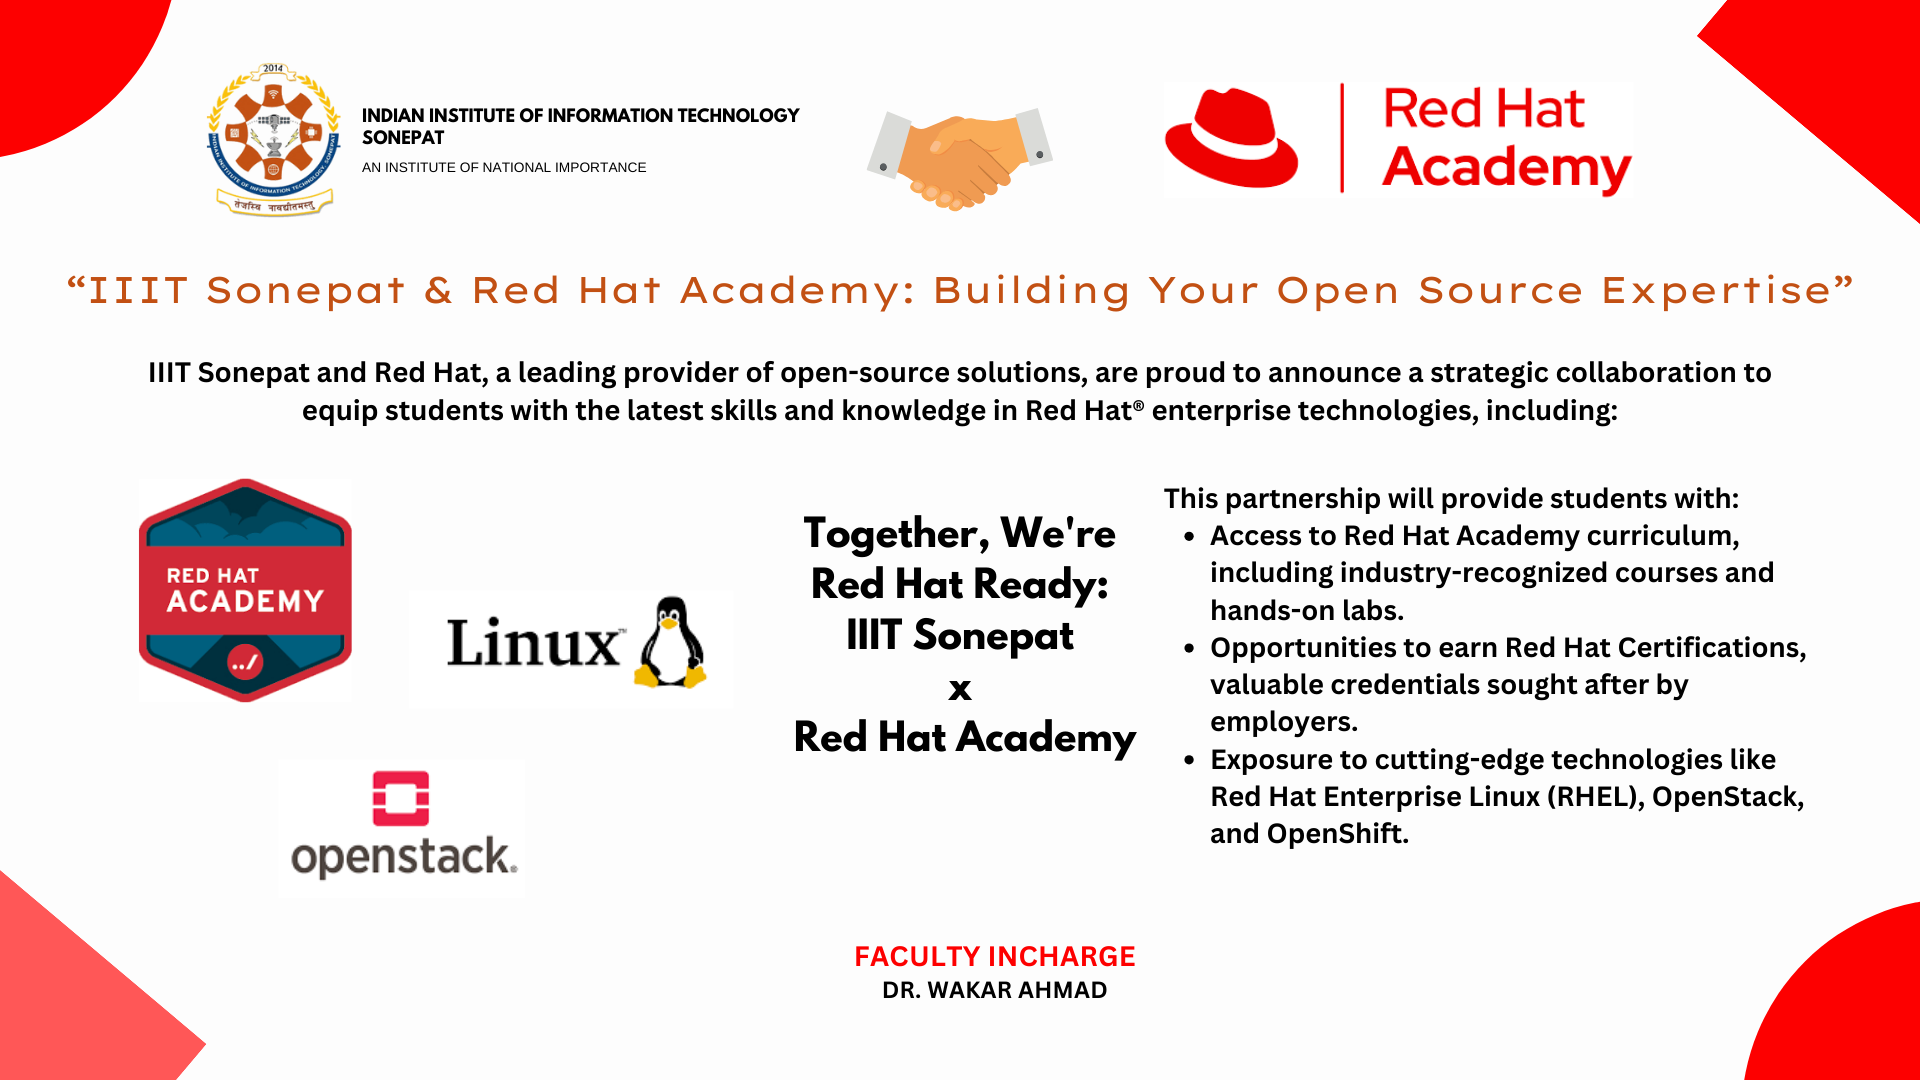 Red Hat Collaboration